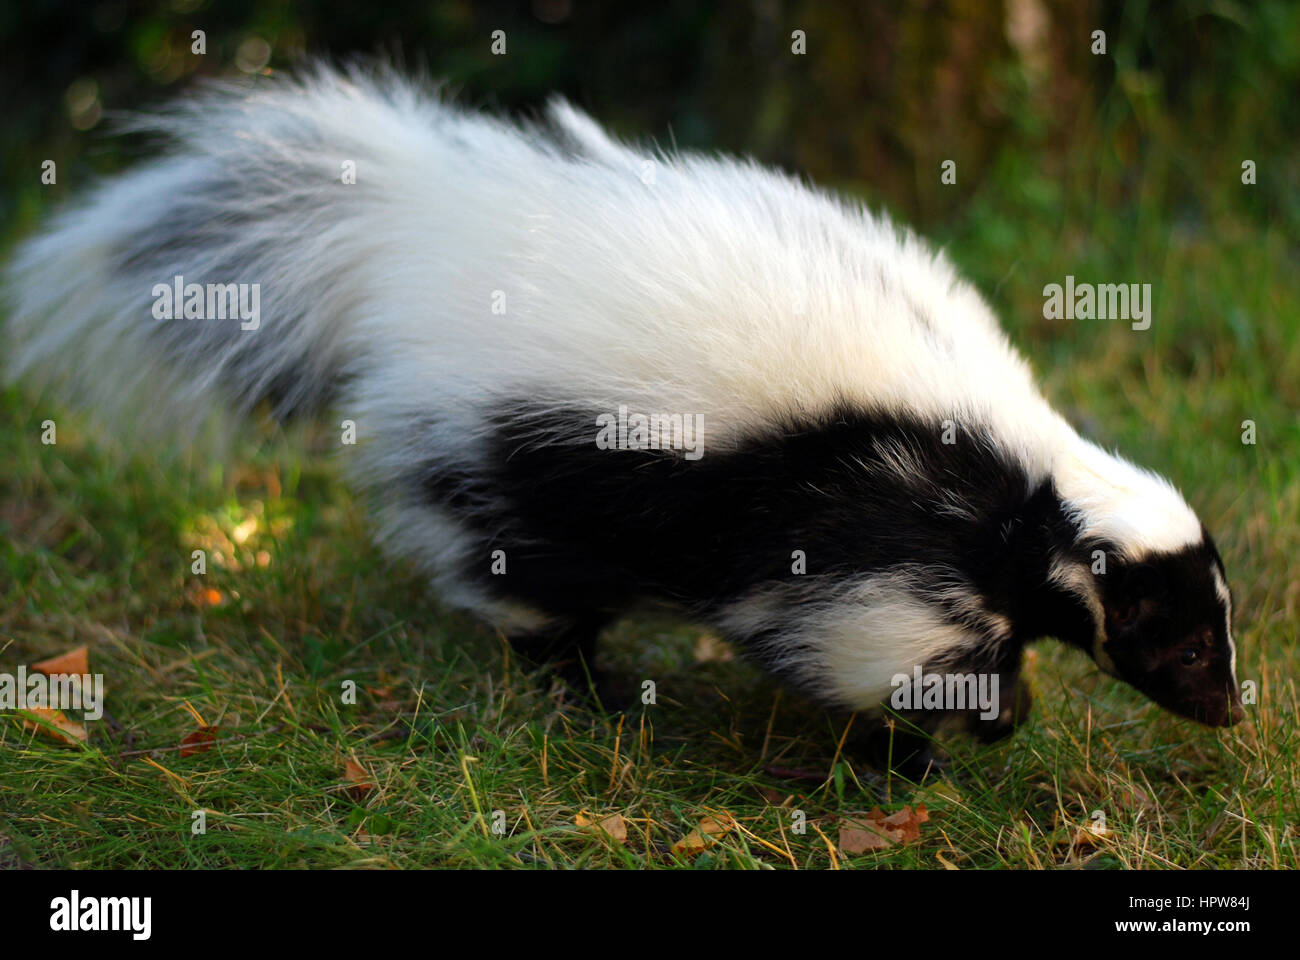 A skunk running in the grass Stock Photo